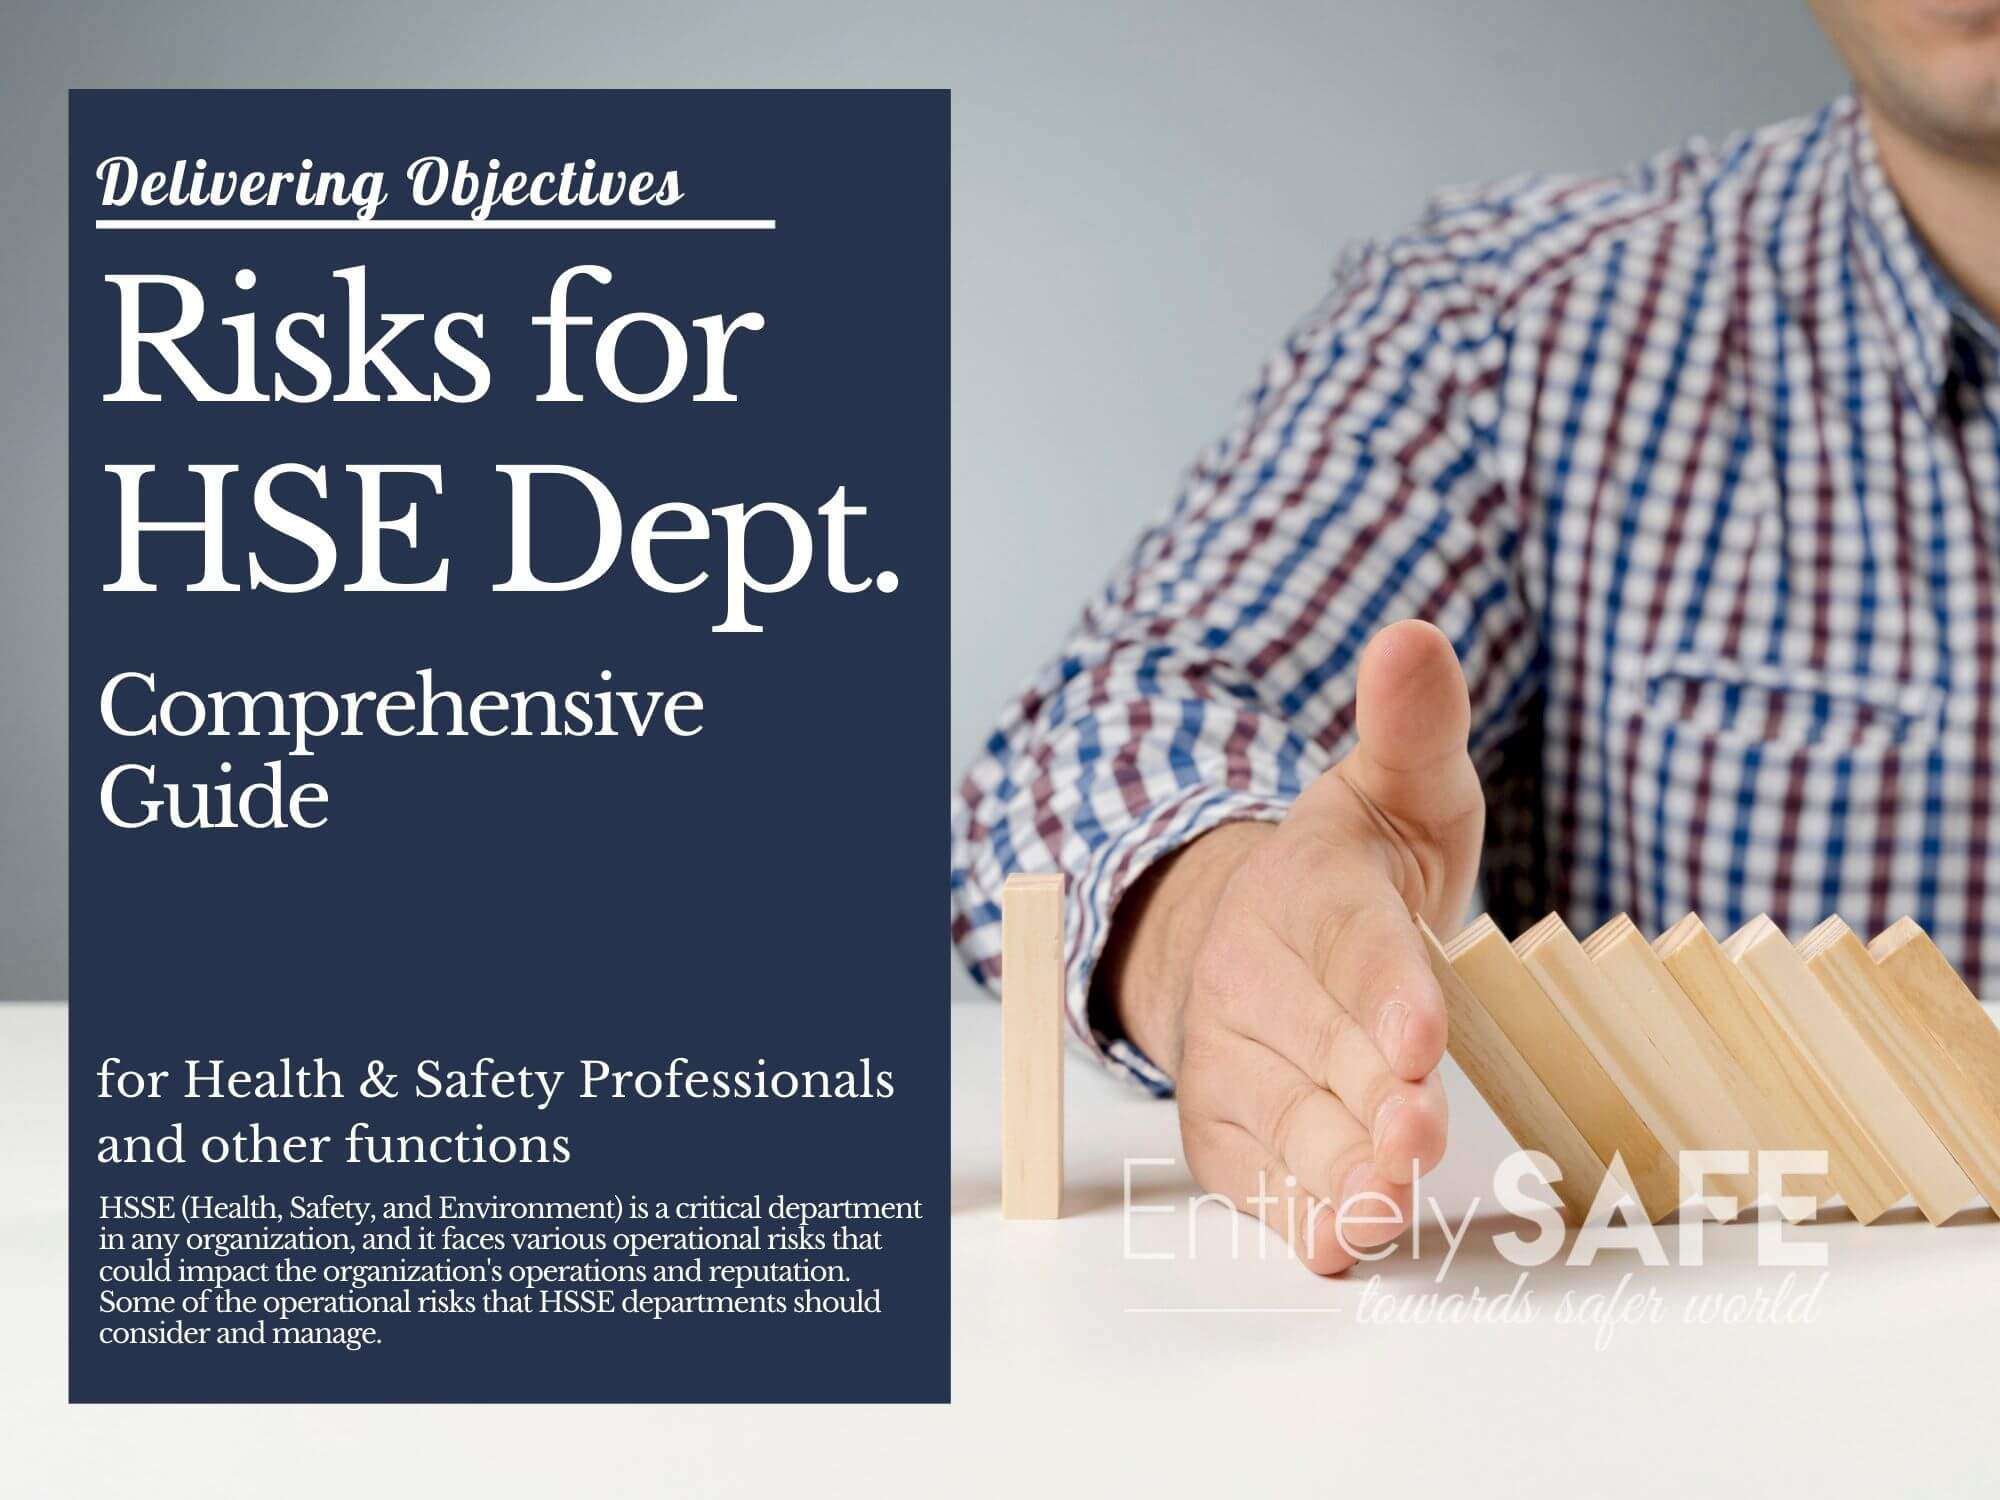 Managing Operational and Legal Risks for HSSE Departments